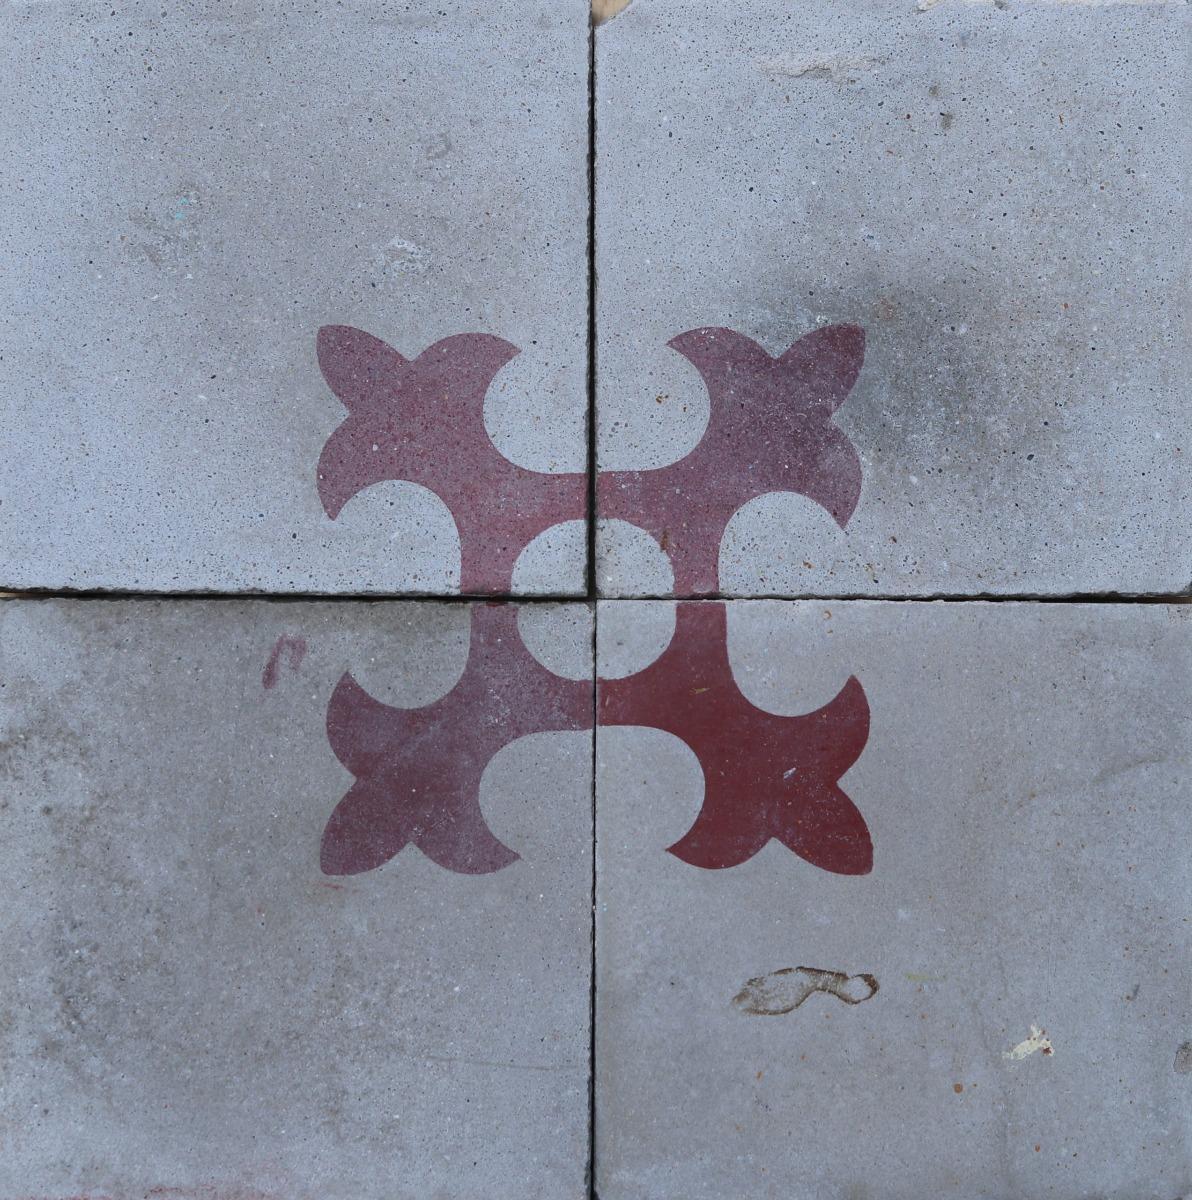 A set of 28 reclaimed encaustic cement tiles. These tiles will cover 1.12 m2 or 12 sq ft. 7 sets of 4 tiles.